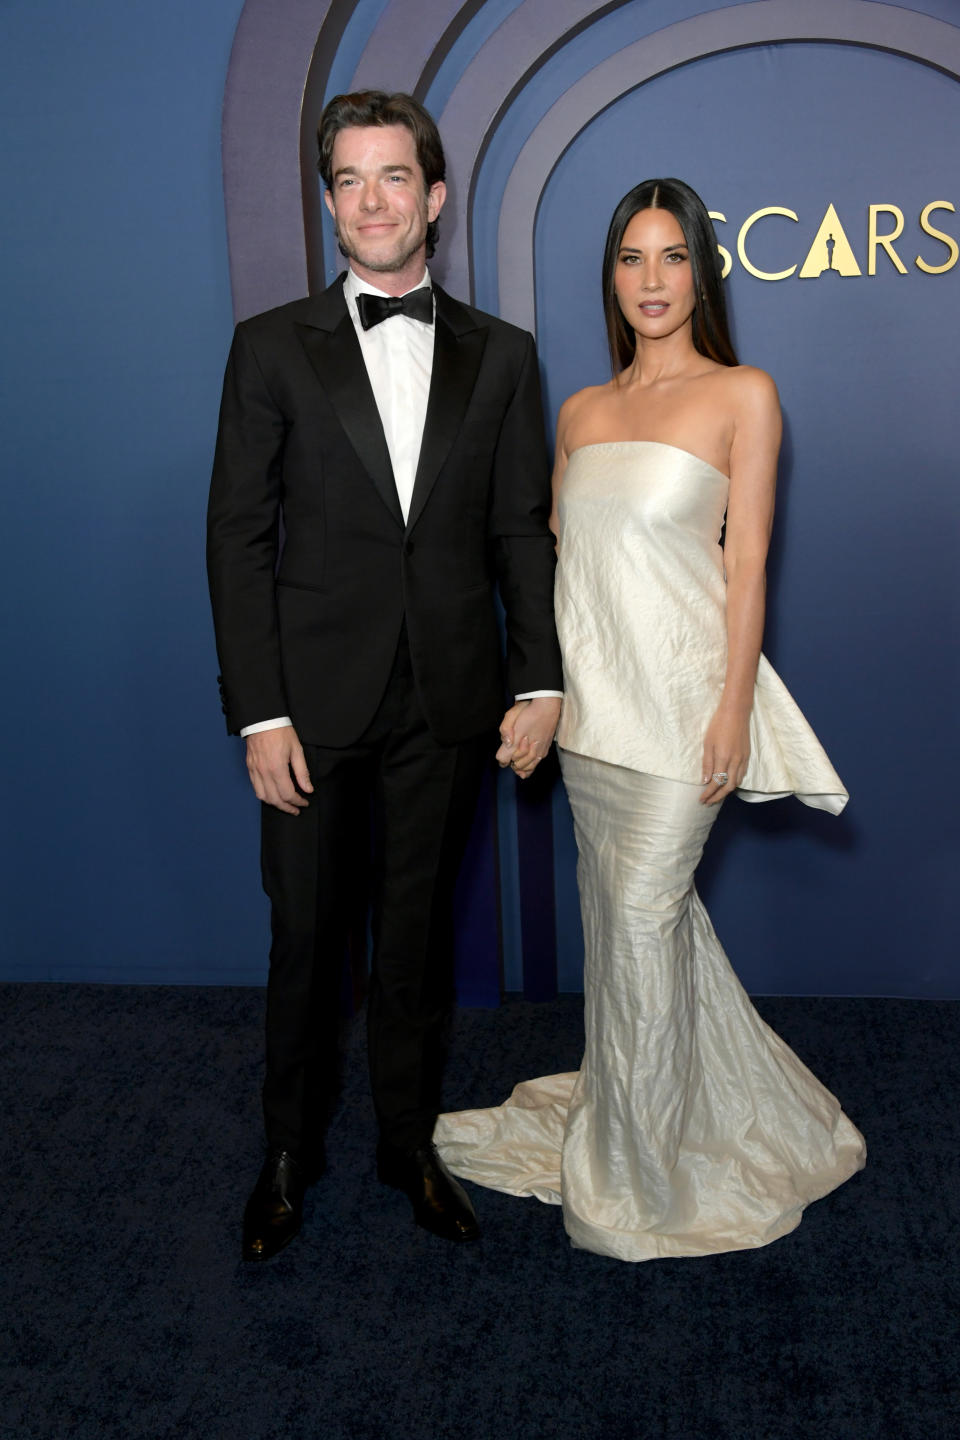 Olivia Munn wears strapless white, wrinkled, dress to the Governors Awards (Image via Getty Images)